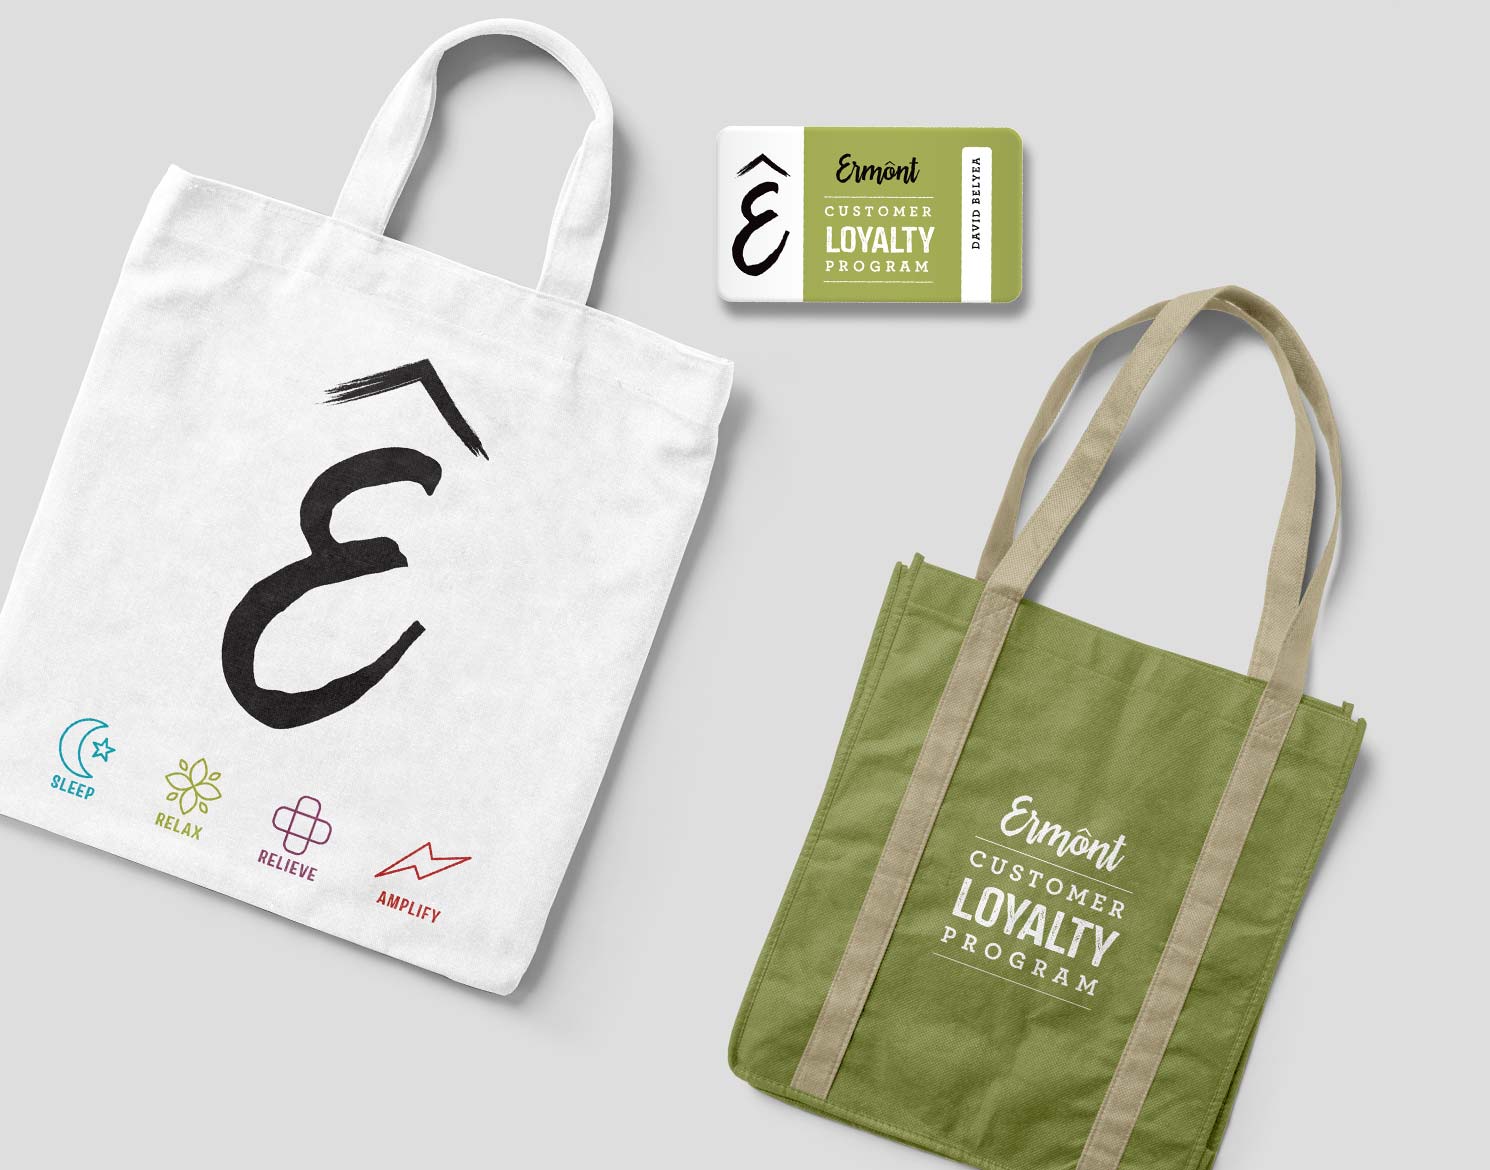 Ermont Loyalty program with logo applied to card and bags